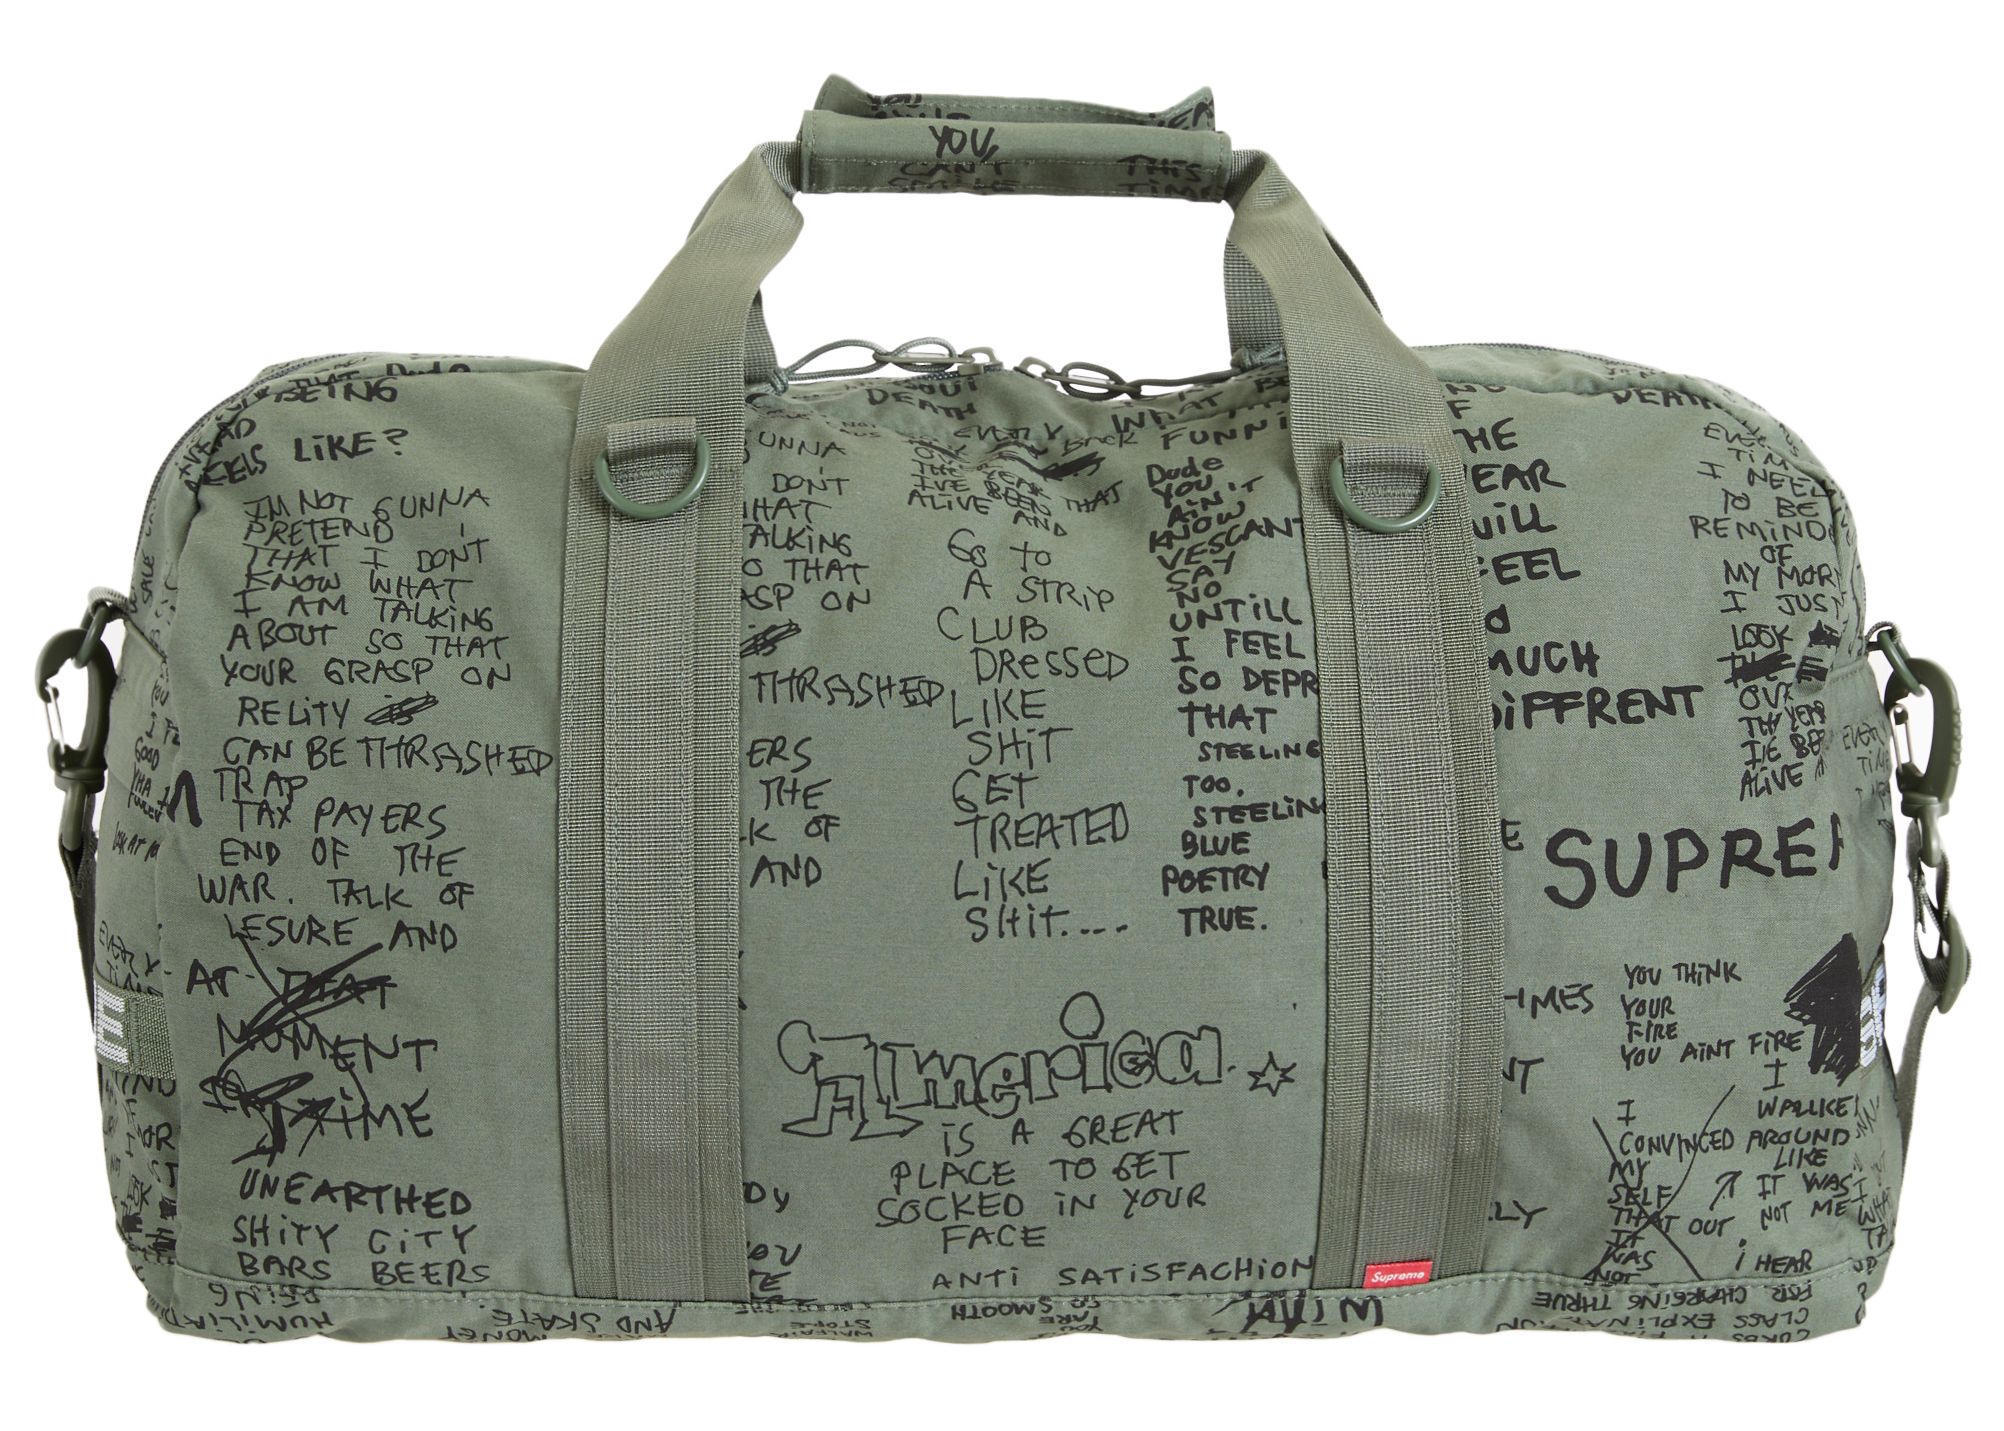 Supreme Field Duffle Bag Olive Gonz - SS23 - US